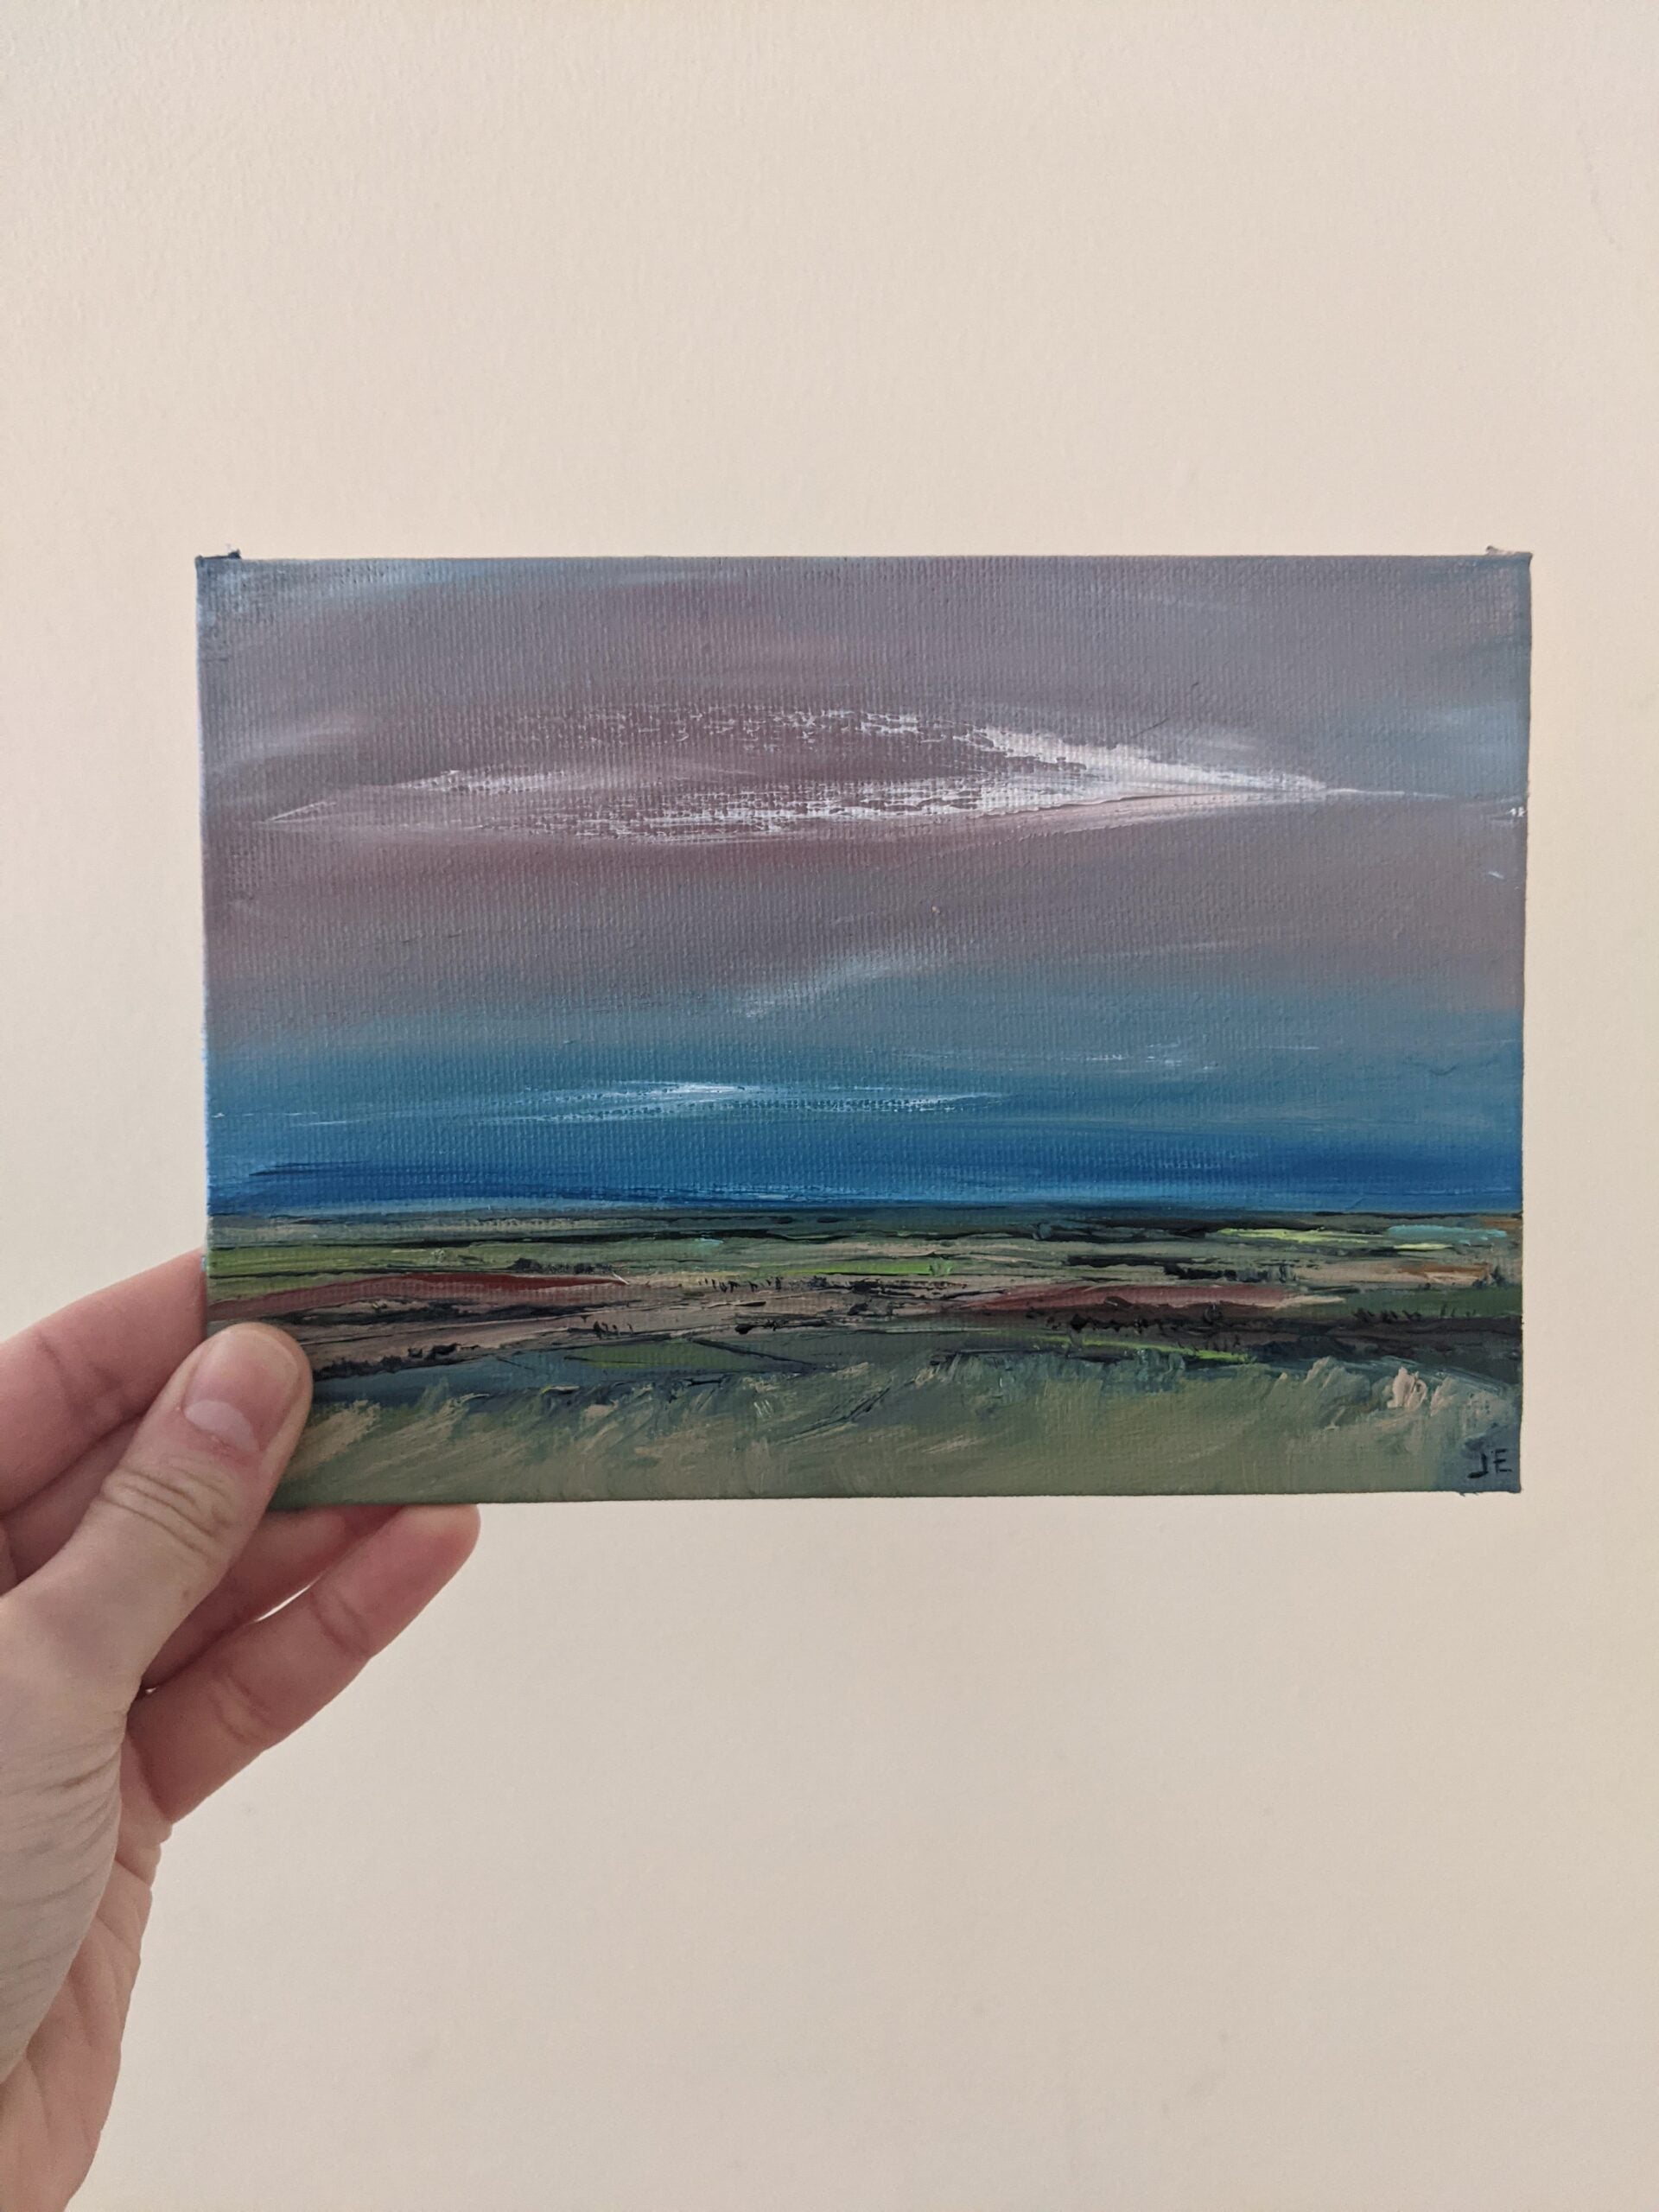 Miniature Coombe Hill Landscape #4 oil painting on canvas board in studio, by Jo Earl